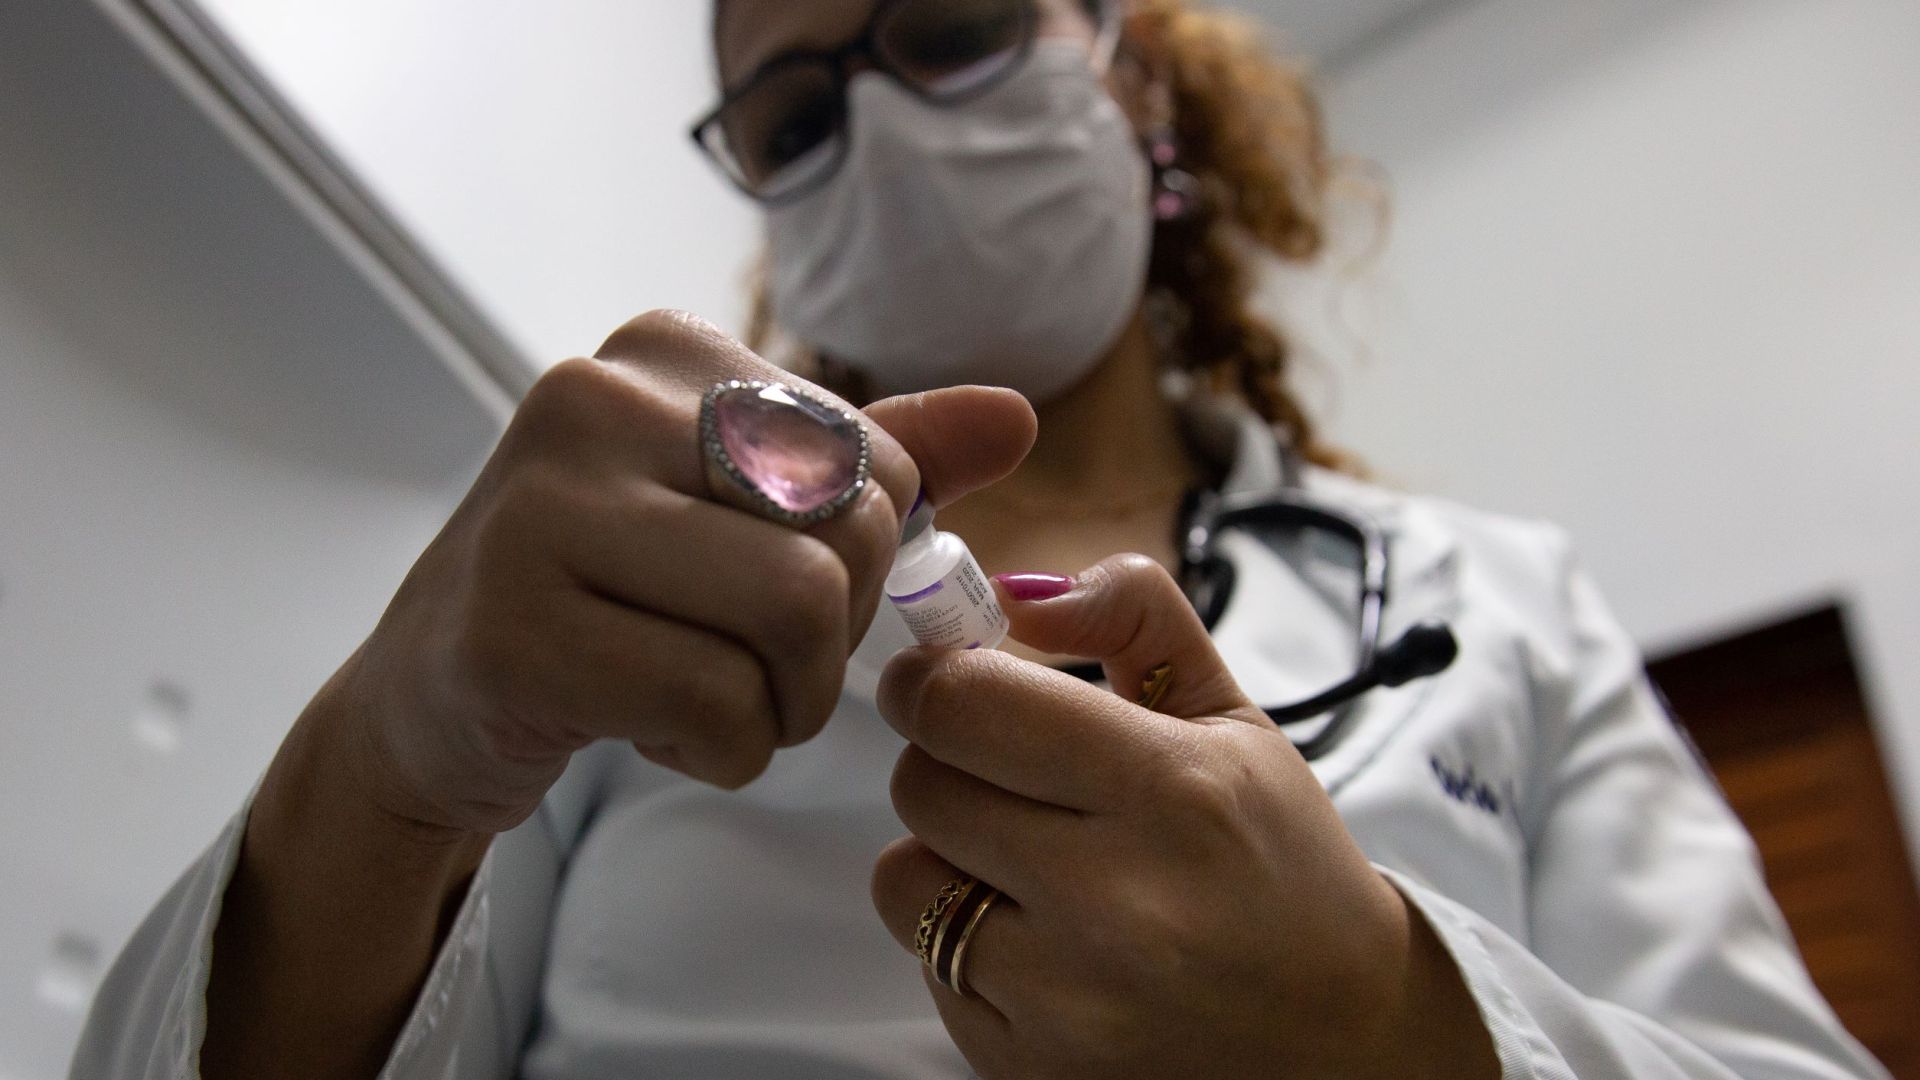 Pediatrician Carla Carvalho reads the side of a vial of measles vaccine